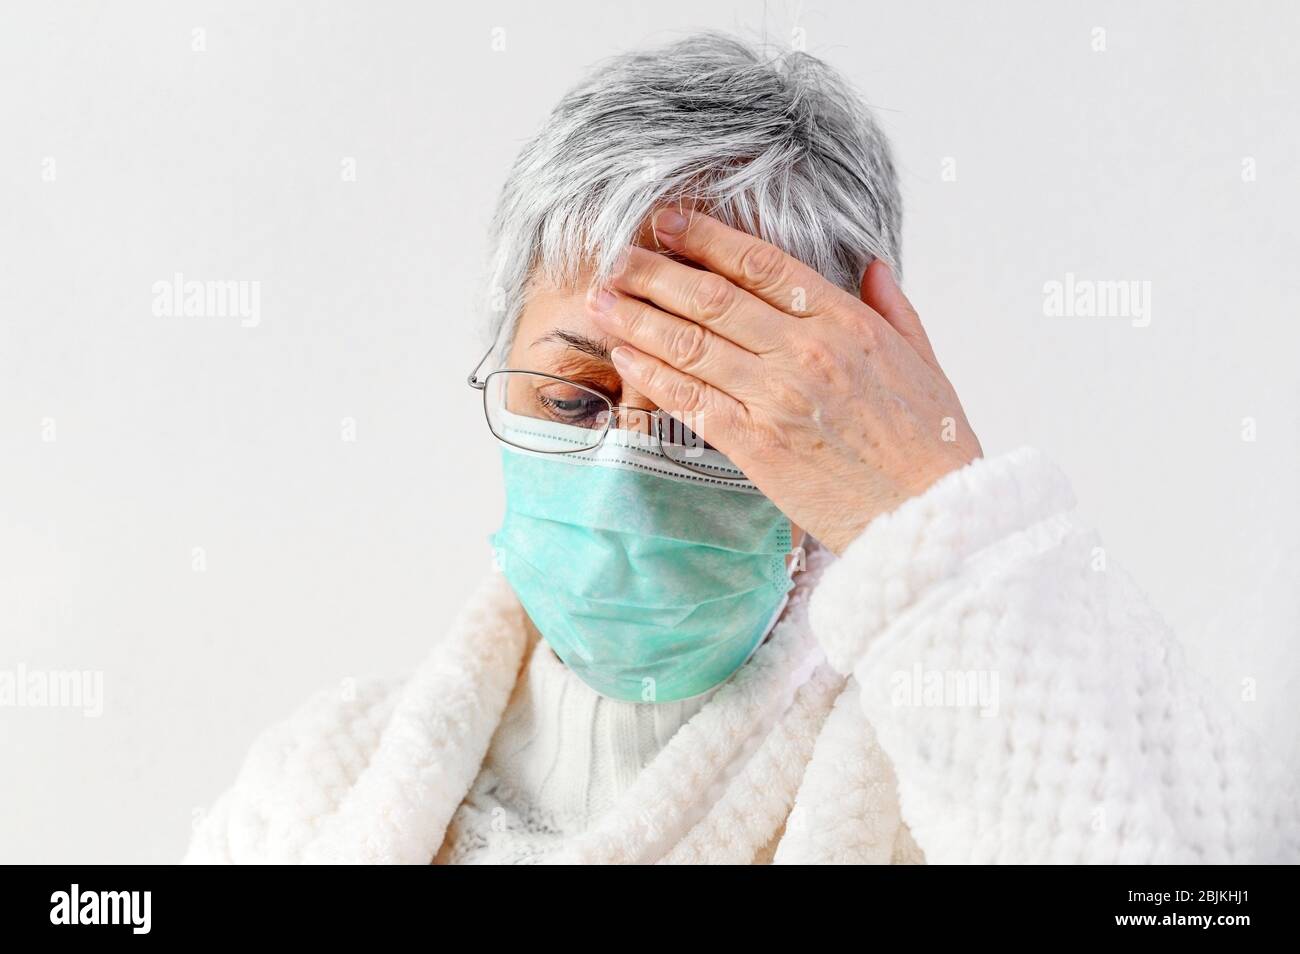 Covid-19. Sick senior woman portrait, wearing face protection mask, fever and coughing, pneumonia disease, risk patient, flu and cold. Stock Photo